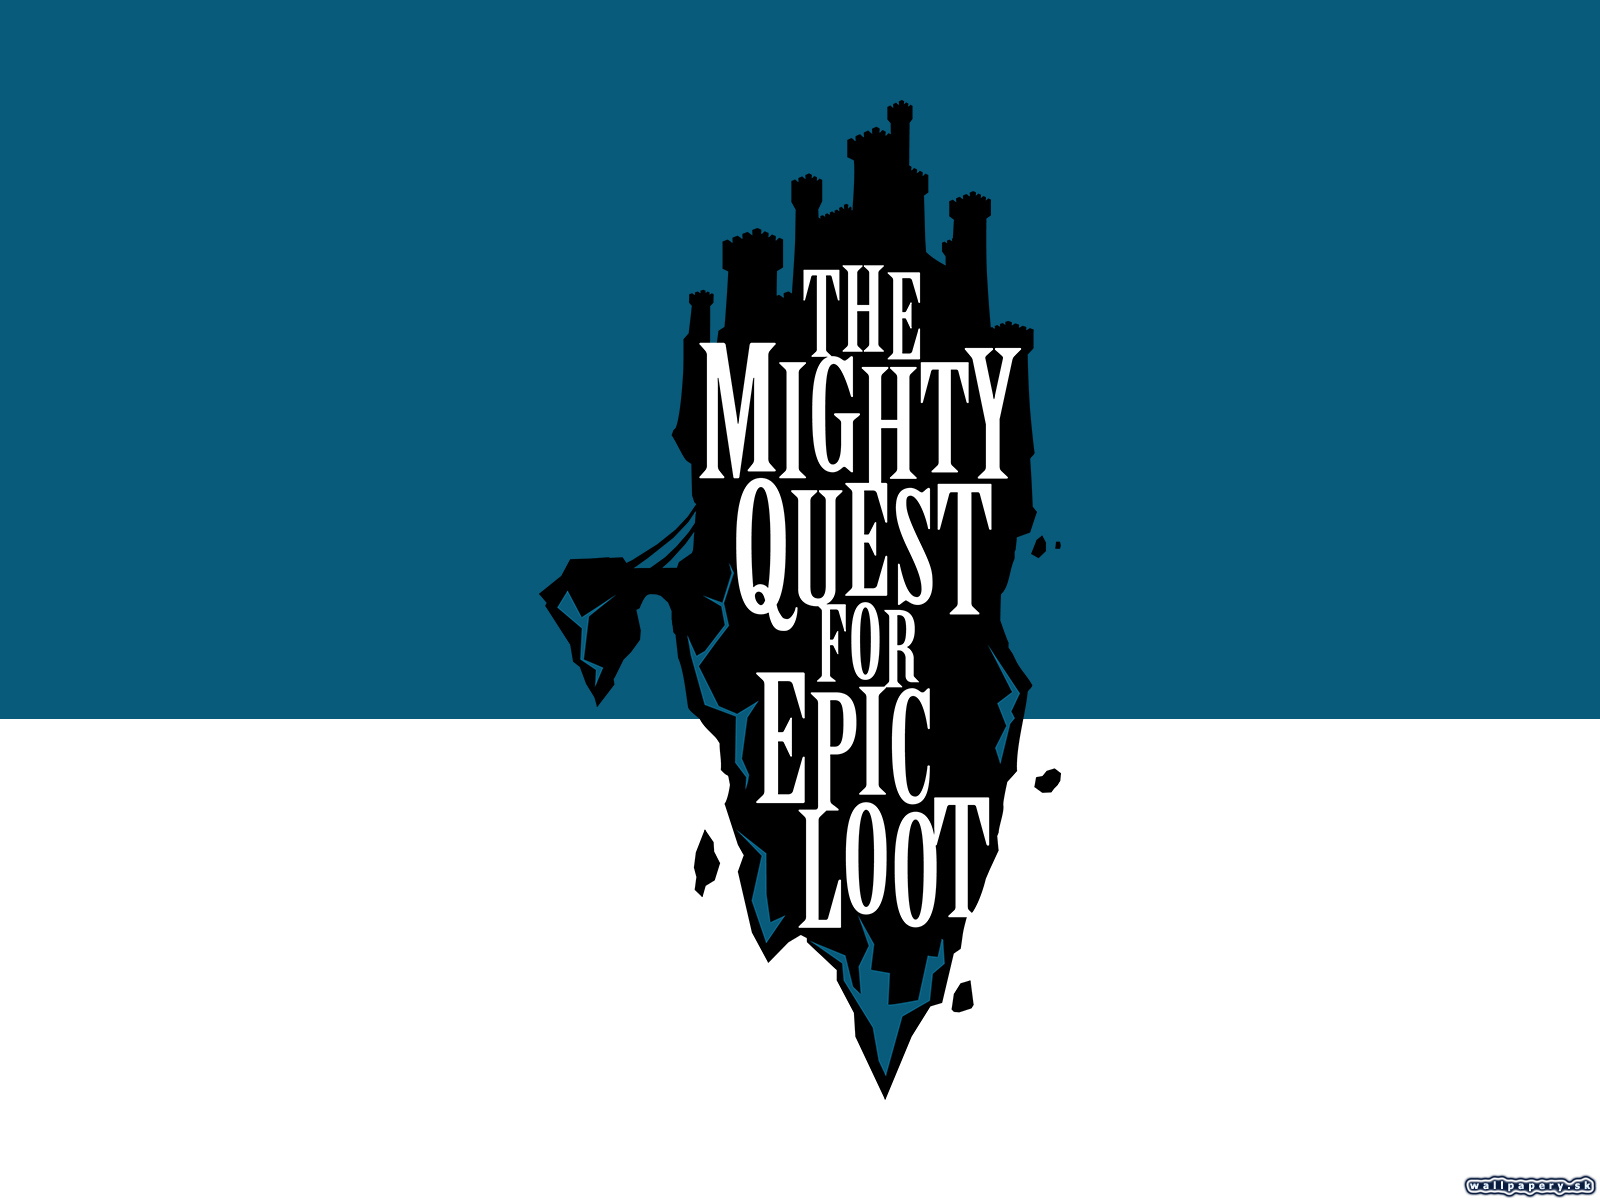 The Mighty Quest for Epic Loot - wallpaper 4